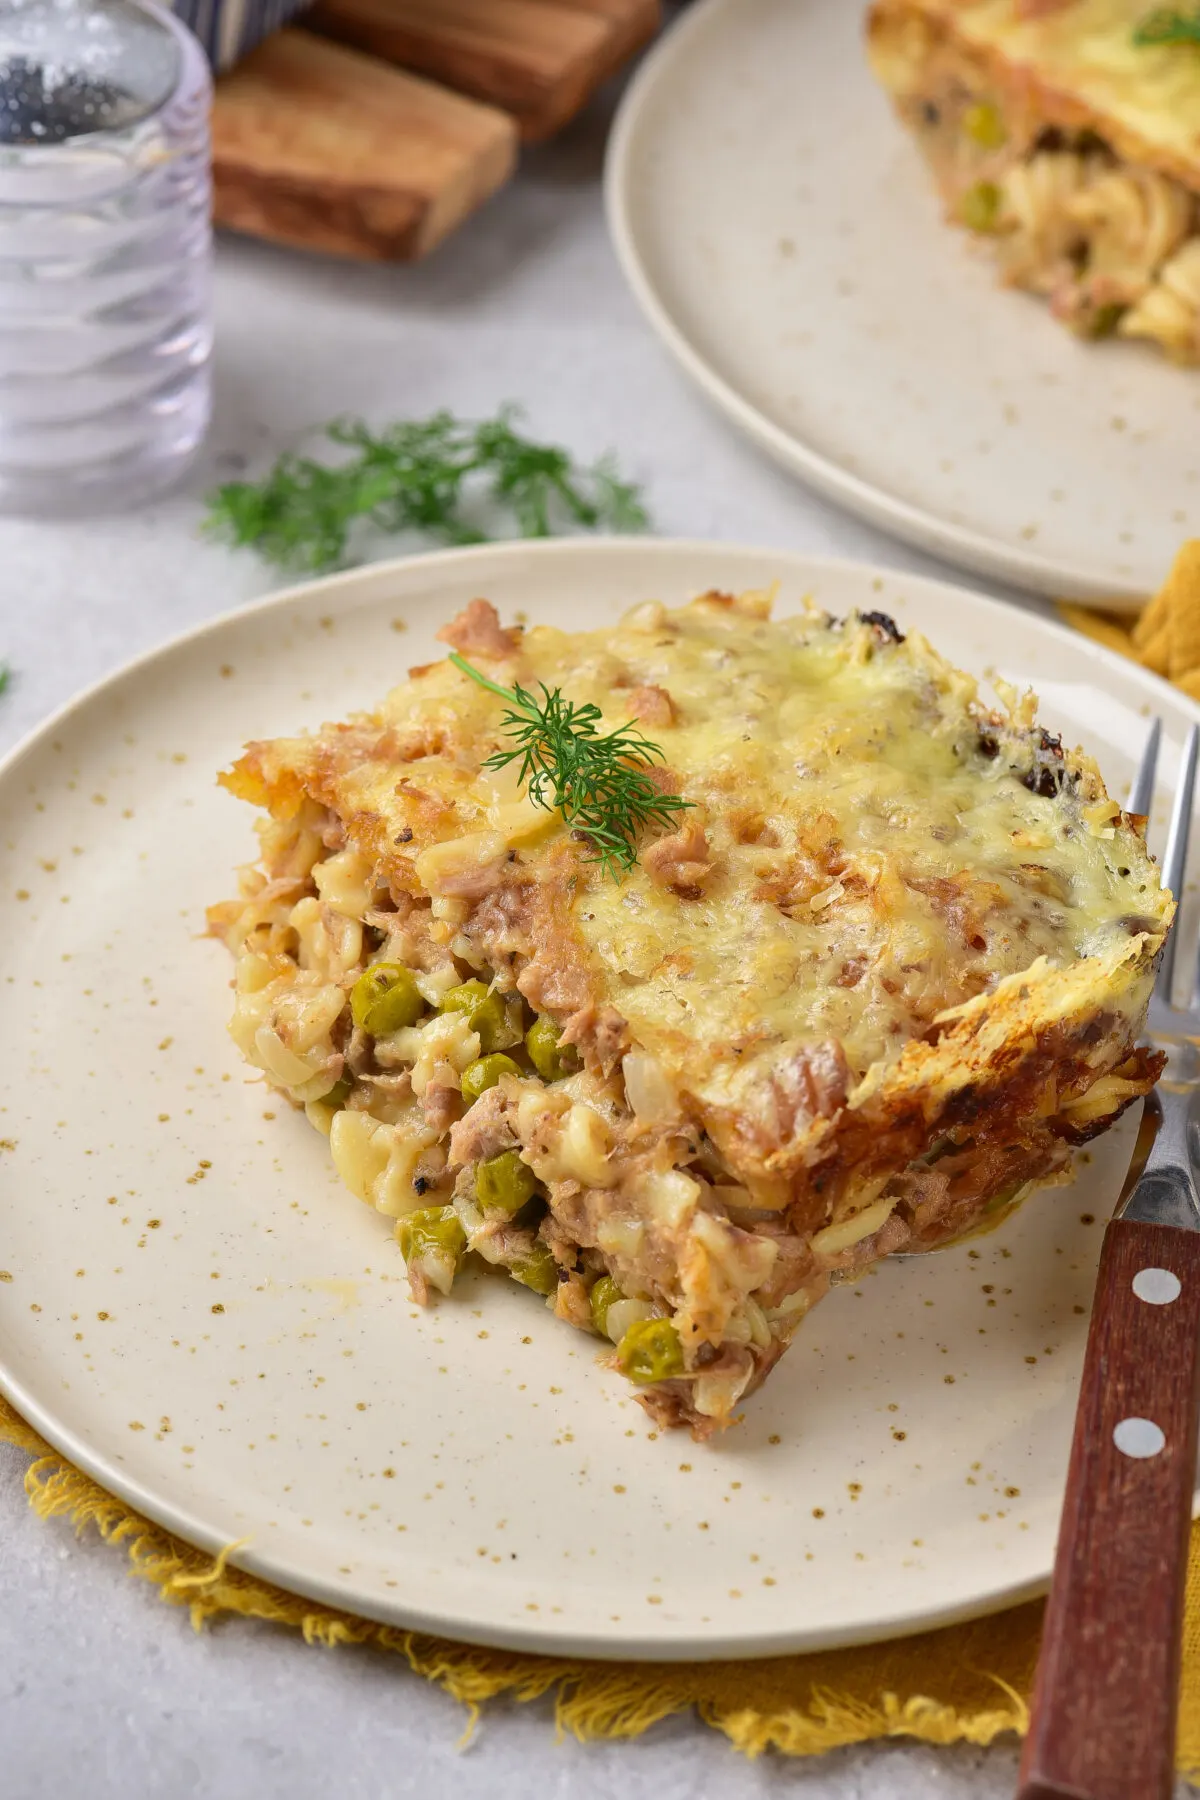 This recipe for Old Fashioned Tuna Casserole is nostalgic and delicious. It's perfect for a family dinner or potluck!